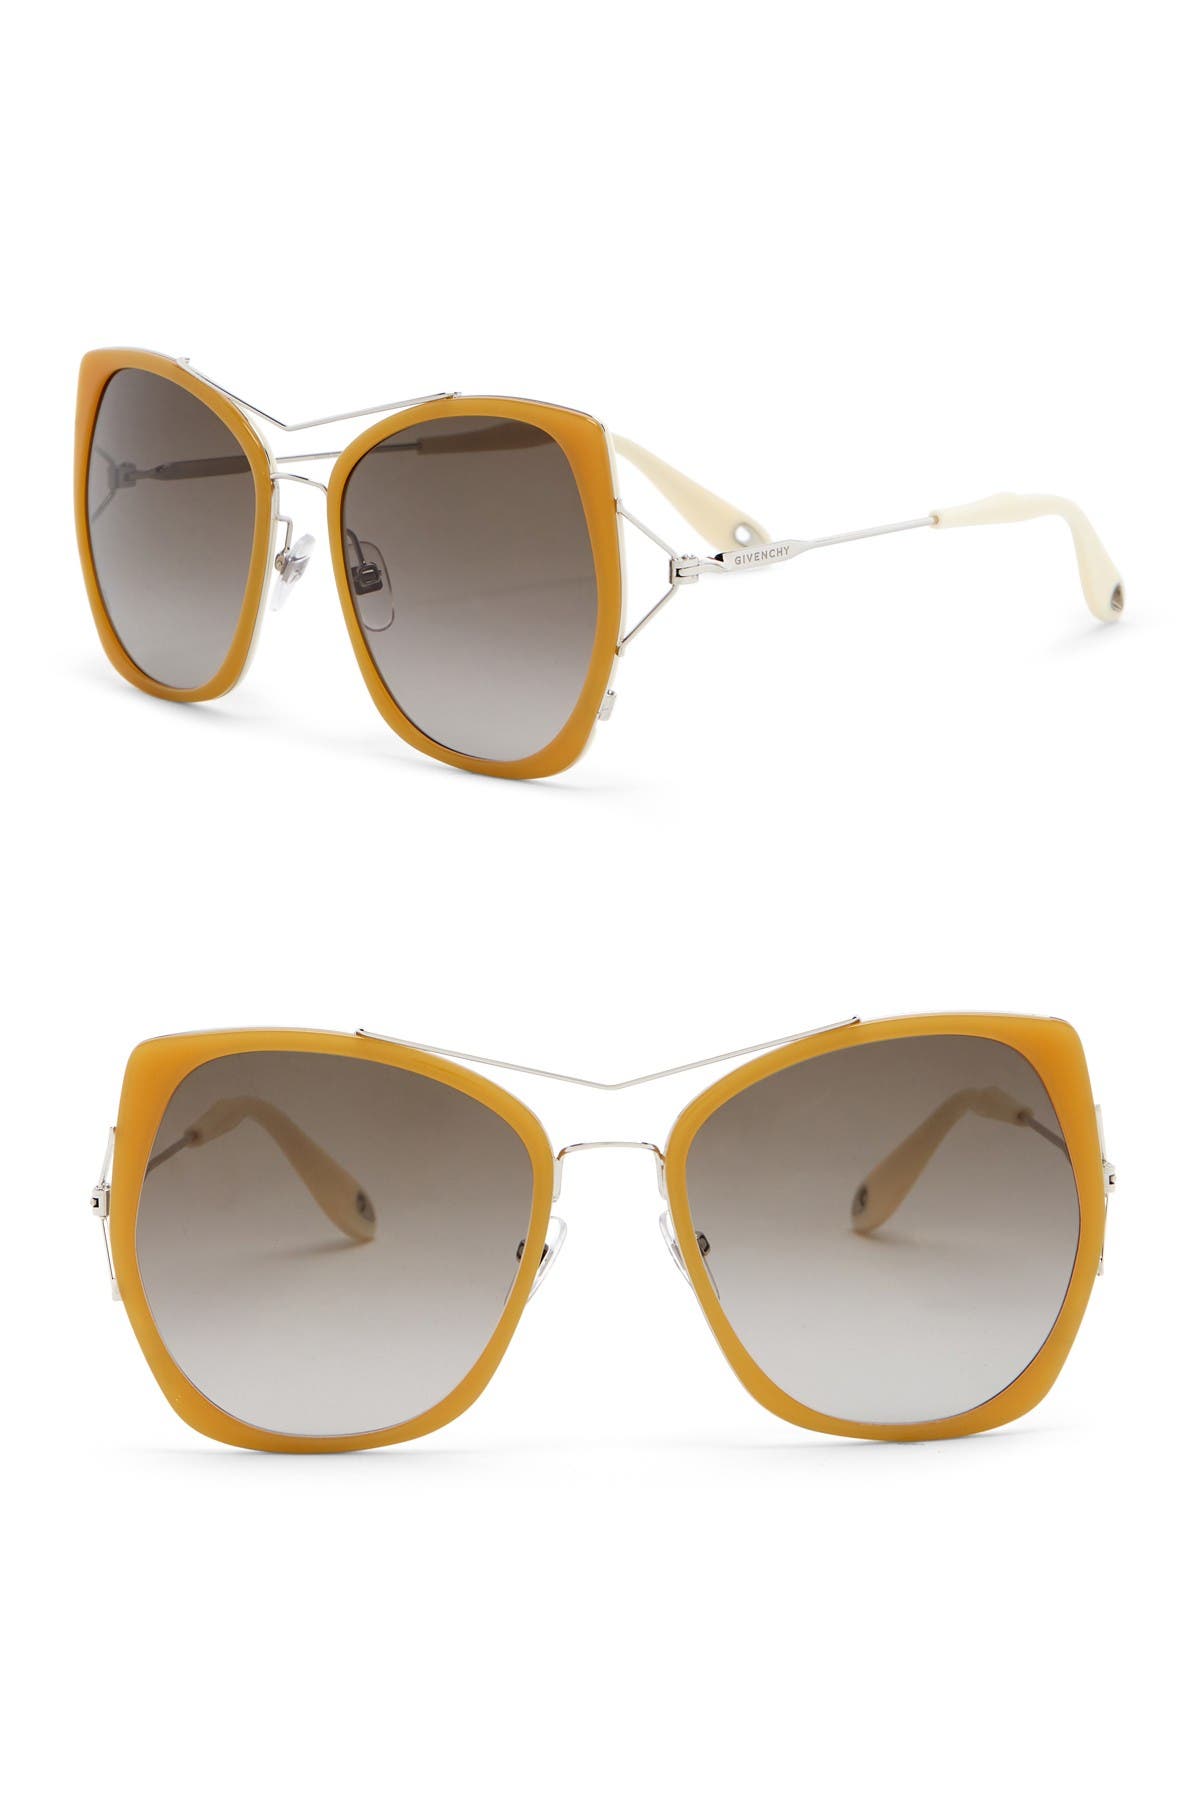 givenchy sunglasses nordstrom rack